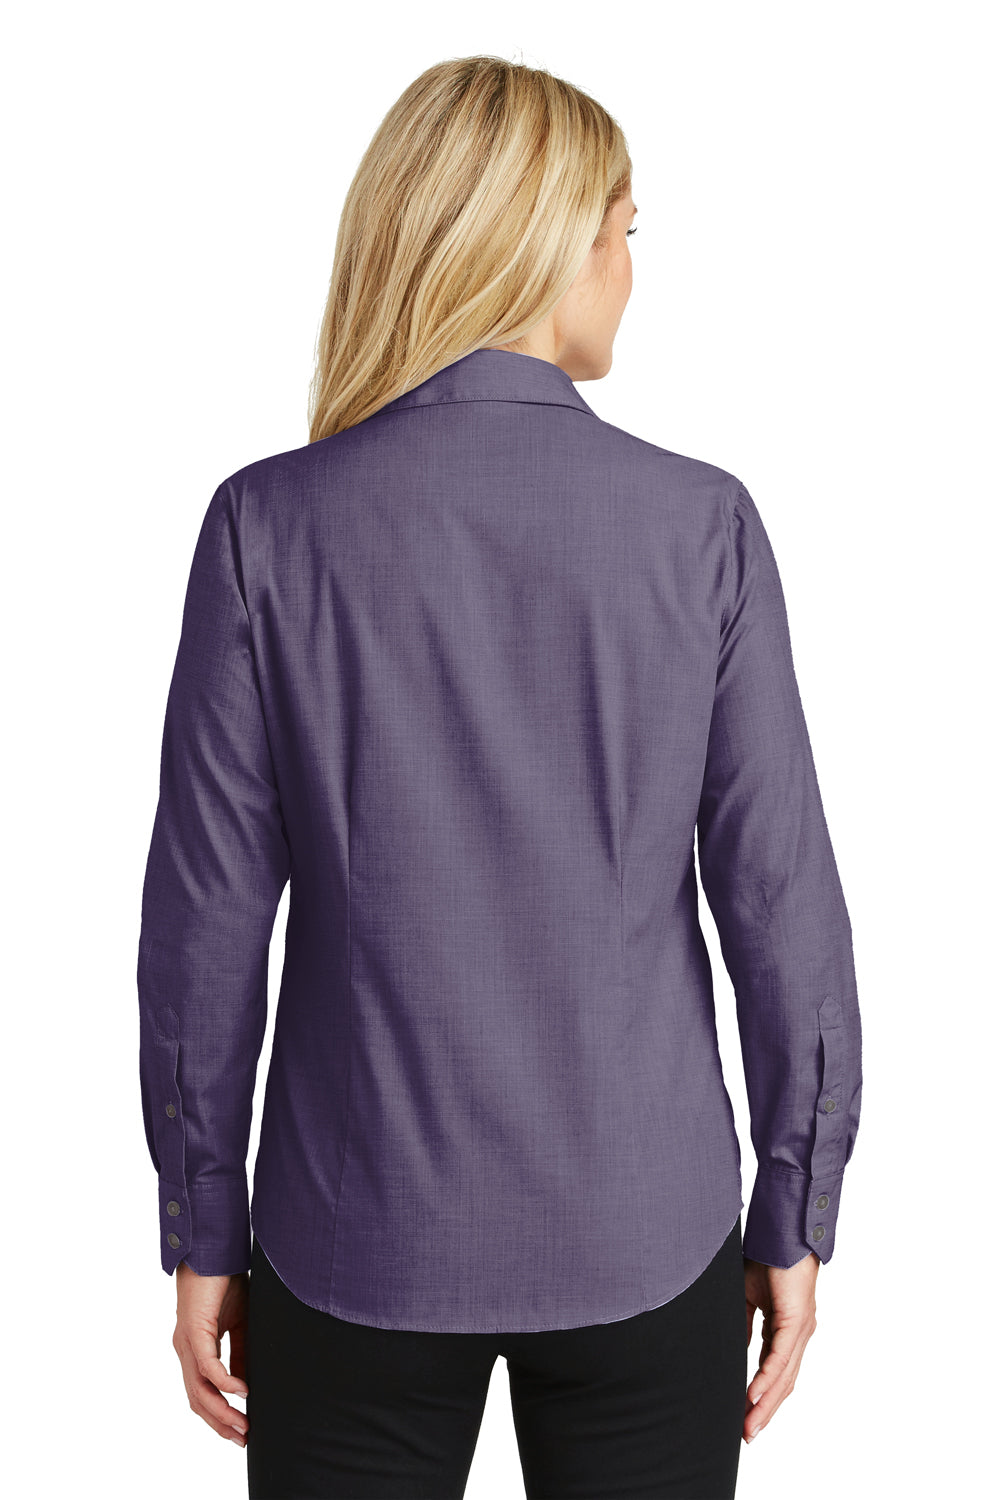 Port Authority L640 Womens Easy Care Wrinkle Resistant Long Sleeve Button Down Shirt Grape Purple Back